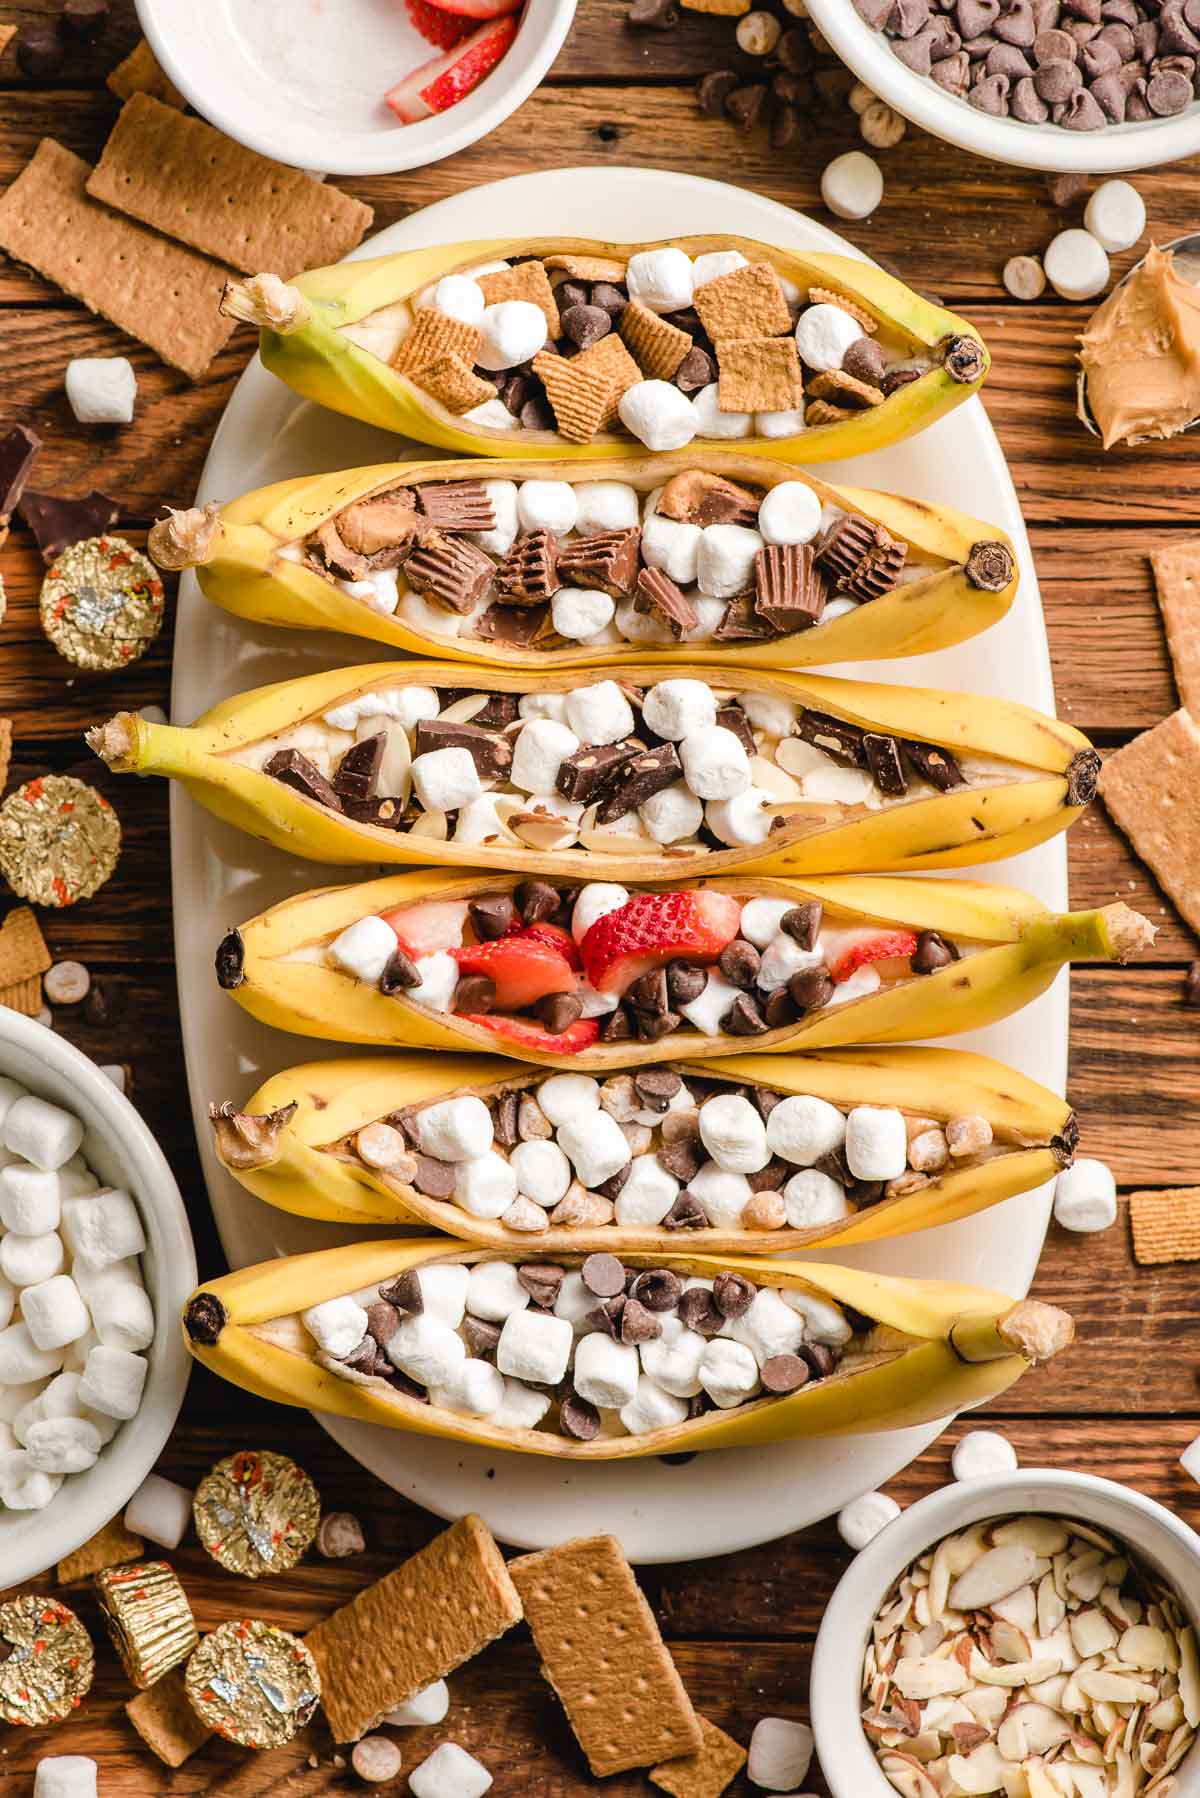 Six bananas, sliced down the middle to form a boat, then stuffed with marshmallows and chocolate.